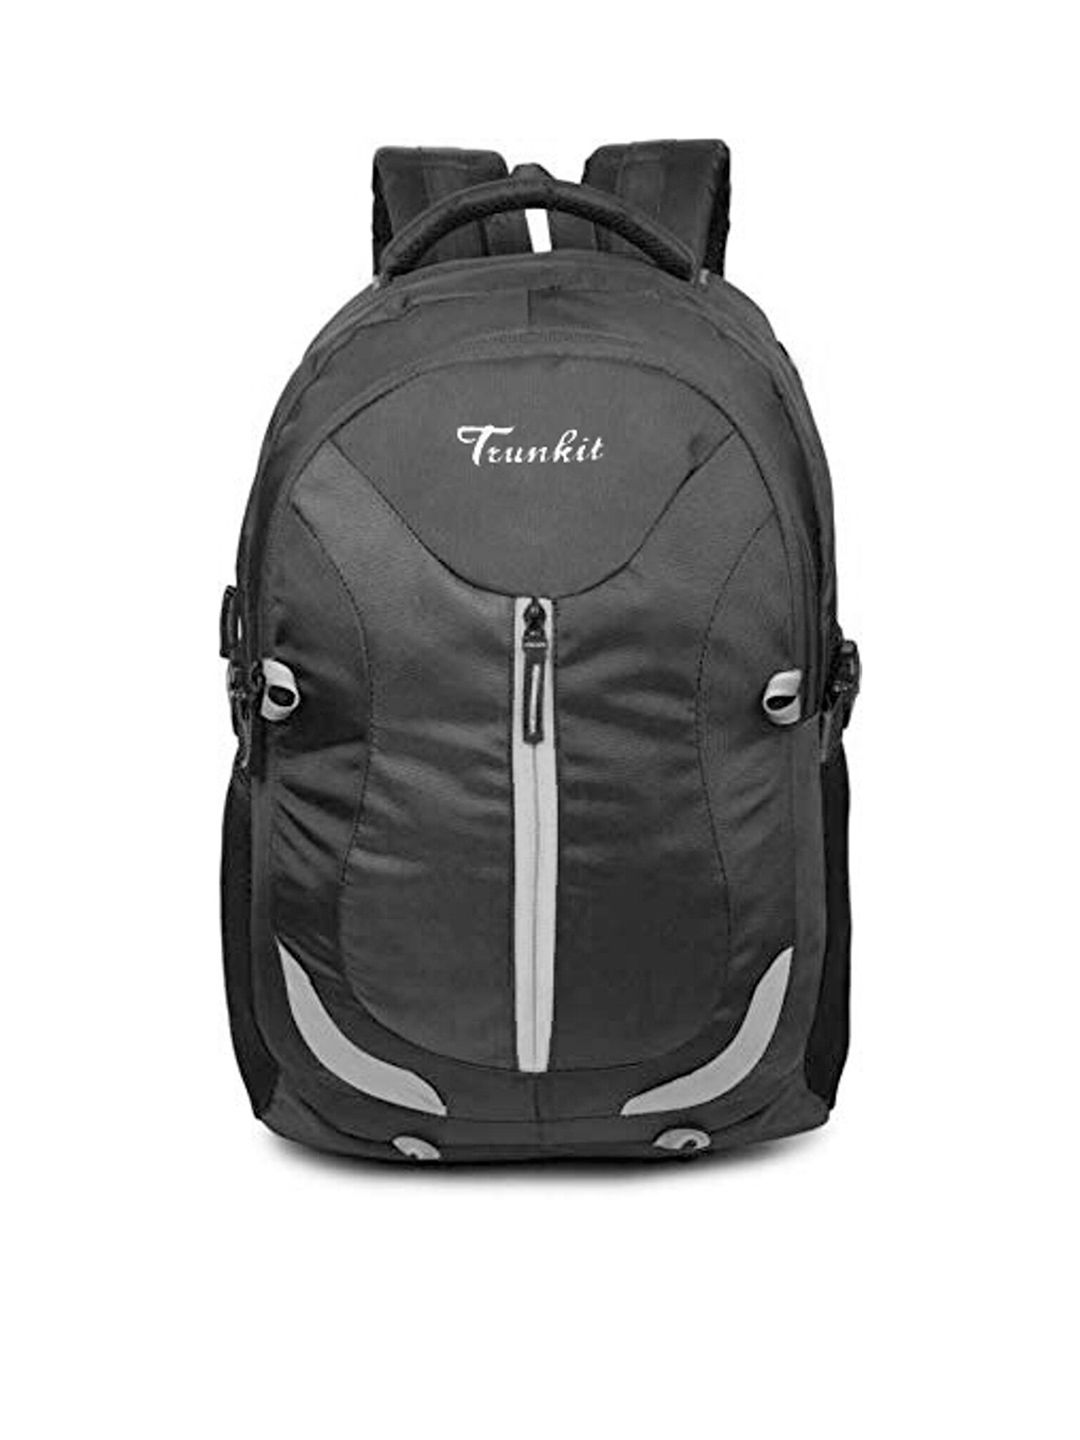 TRUNKIT Unisex Black 15 Inch Laptop Backpack Price in India